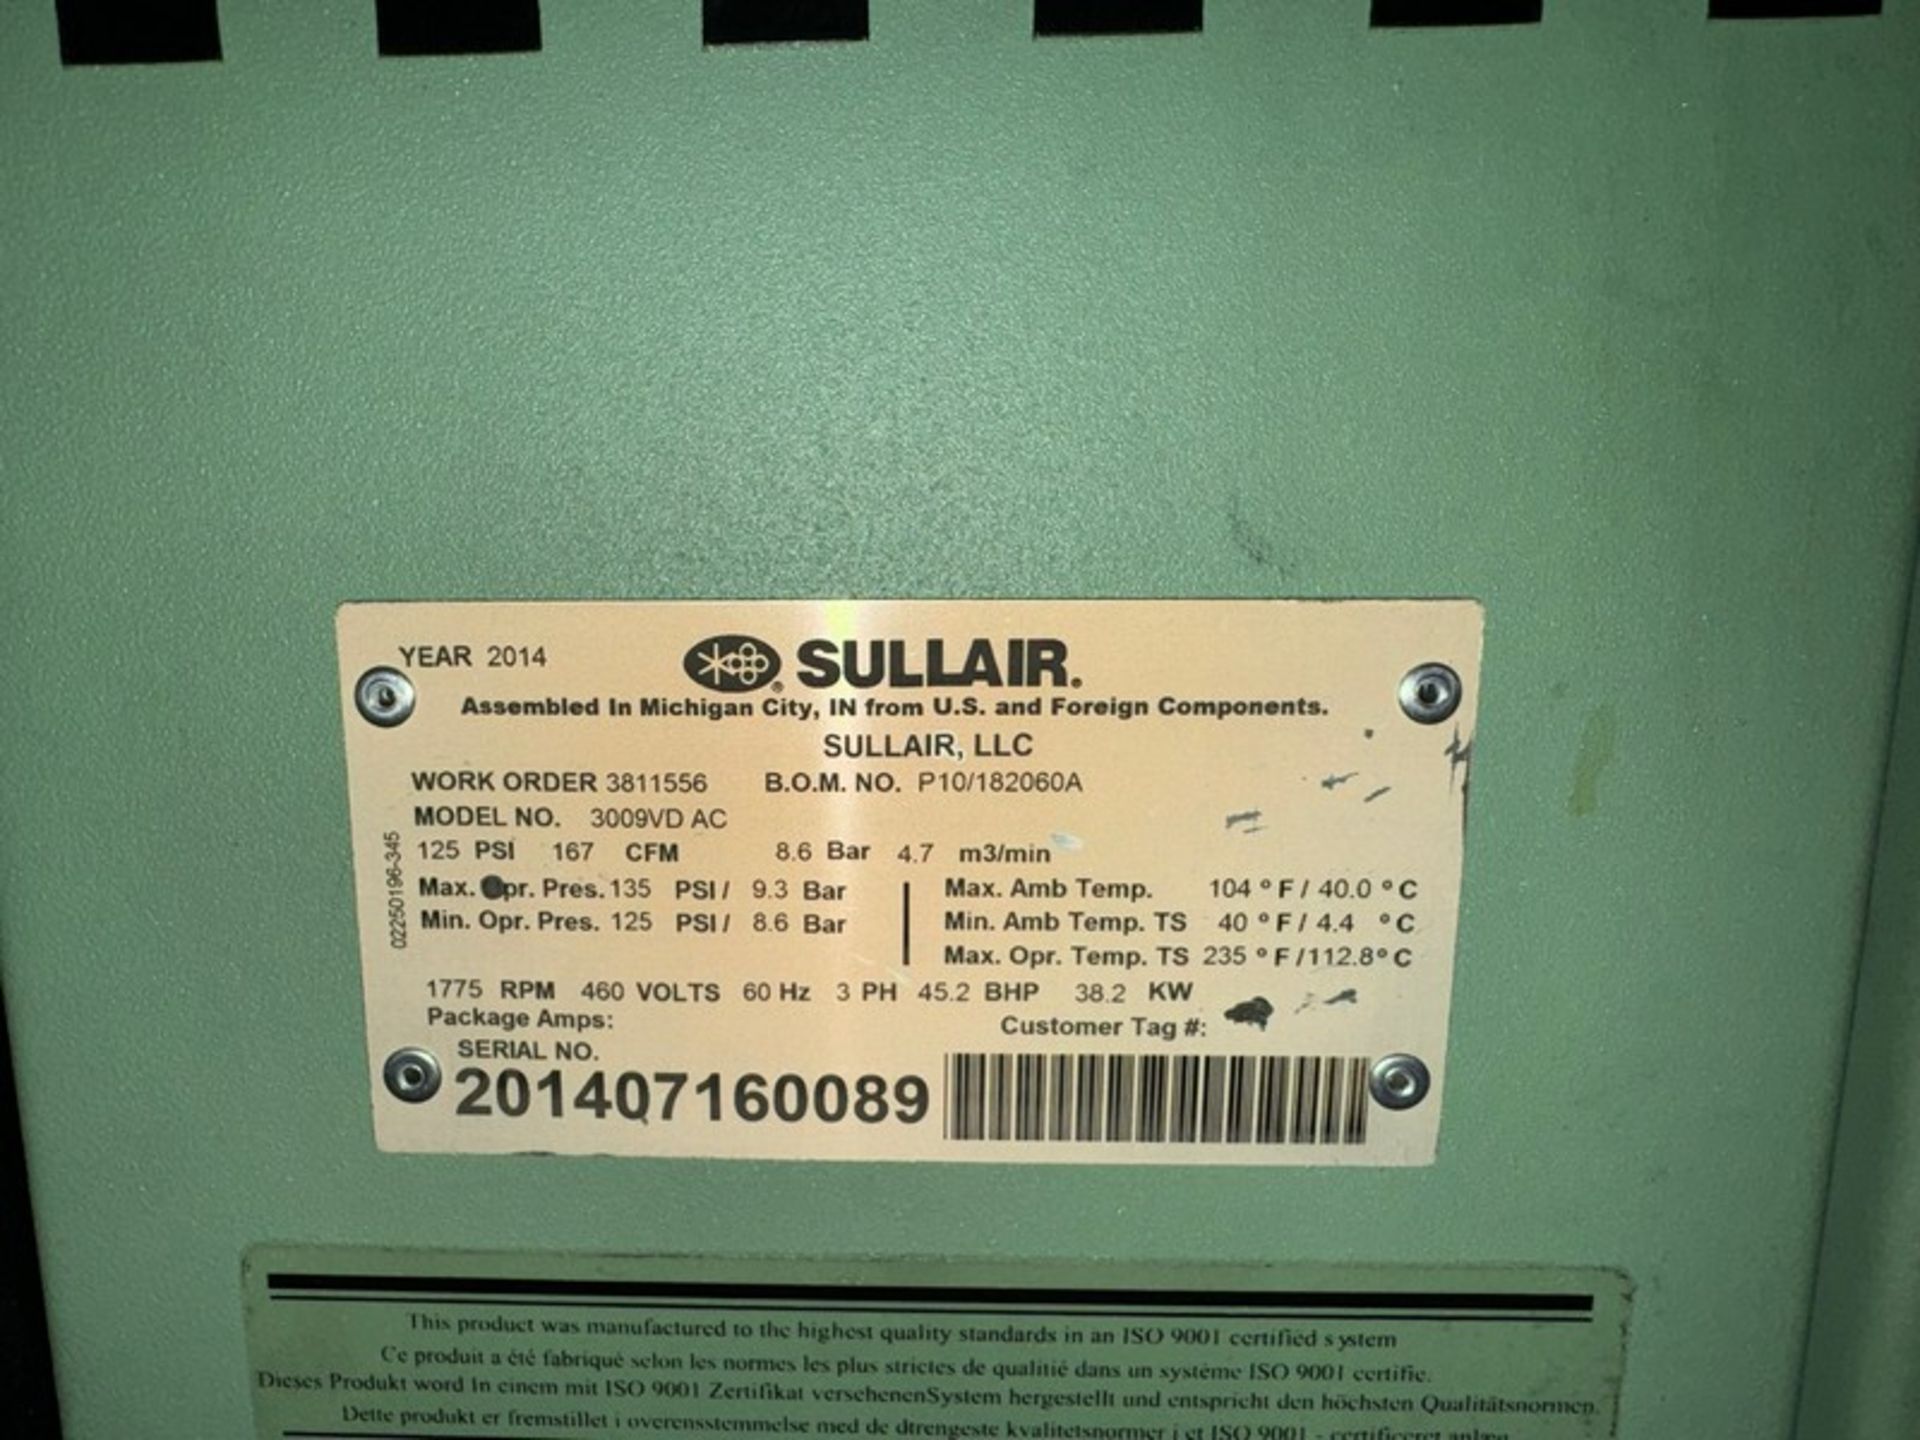 2014 Sullair Air Compressor, M/N 3009VD AC, S/N 201407160089, 125 PSI 167 CFM, with Integral Dryer - Image 6 of 6